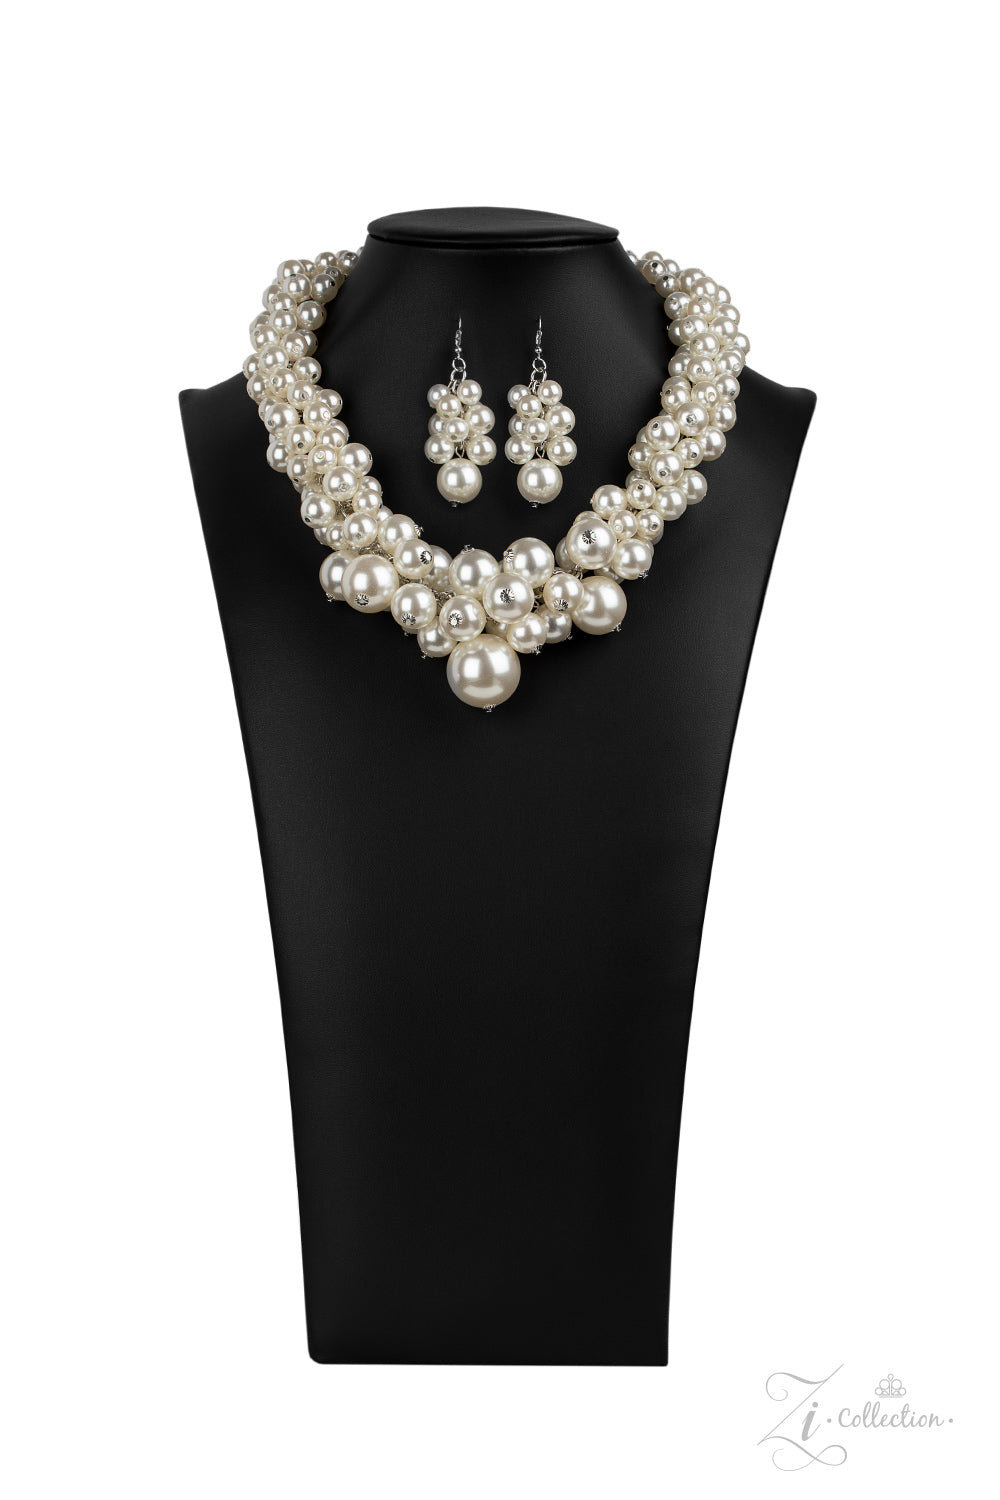 Zi Collection 2020 - An exaggerated display of clustered pearls elegantly sweeps below the collar. The classic white pearls gradually increase in bubbly intensity as they reach the center of the regal piece, adding over-the-top timelessness to the unapologetic pearl palette. Features an adjustable clasp closure.  Sold as one individual necklace. Includes one pair of matching earrings. 